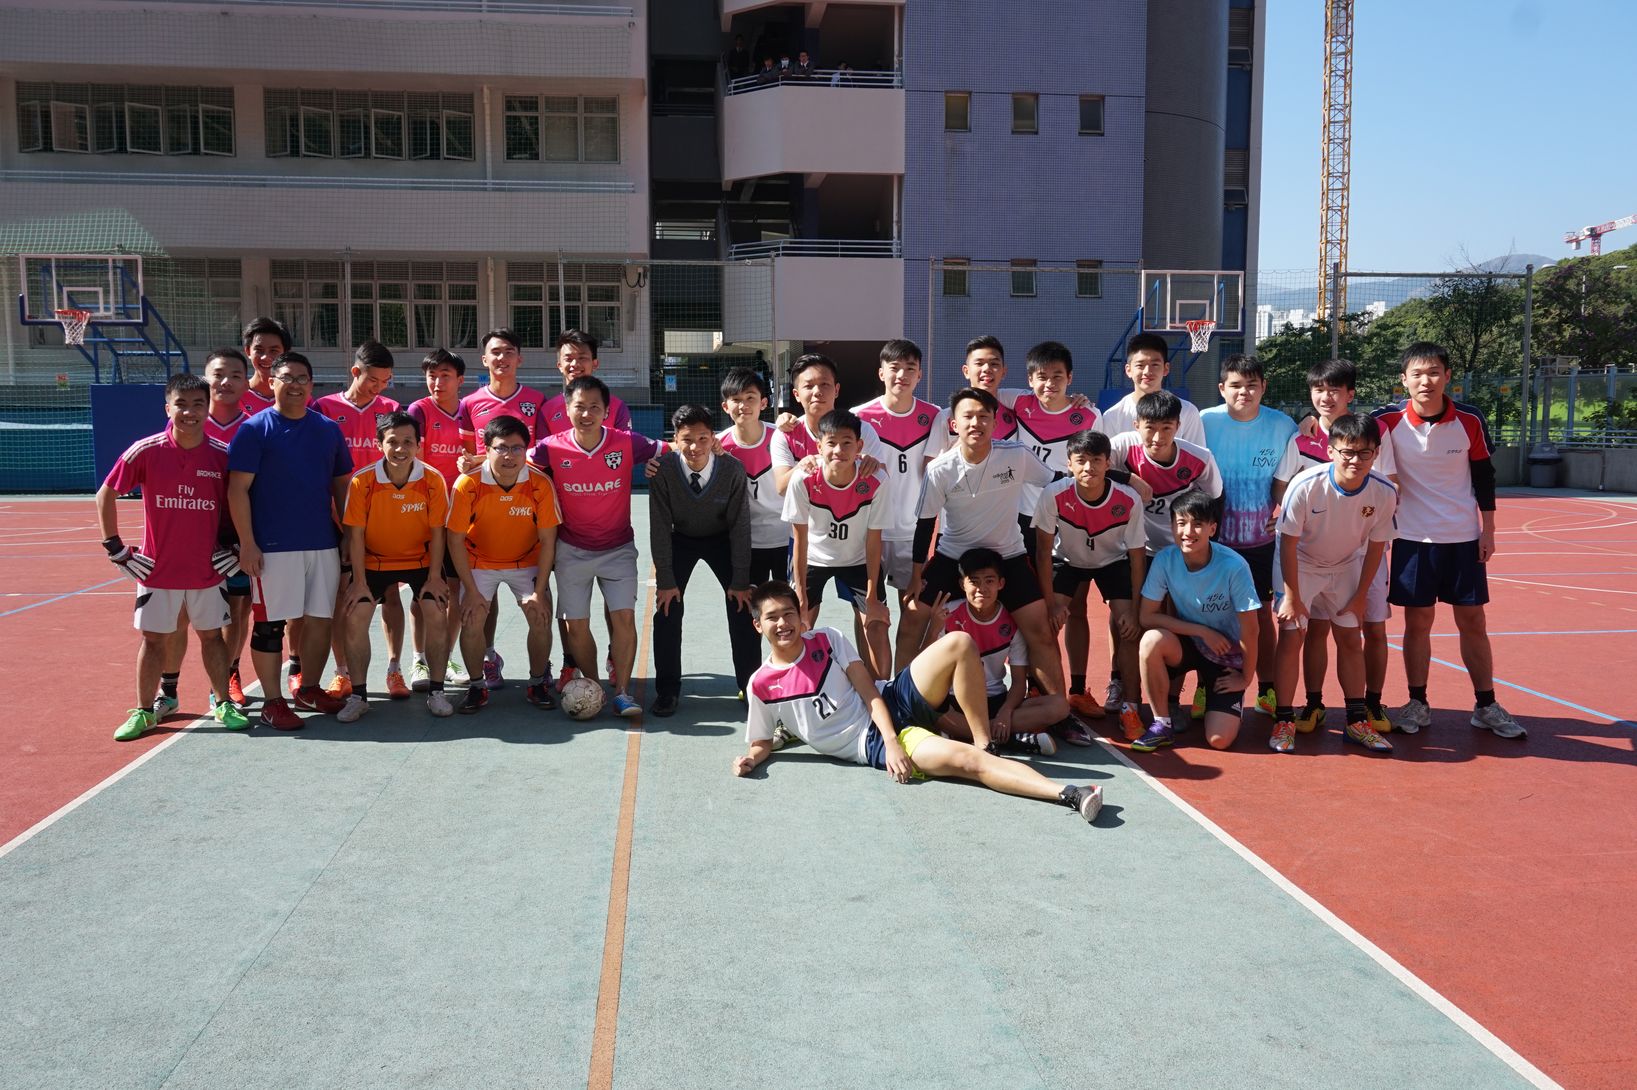 The Inter-Class Soccer Competition